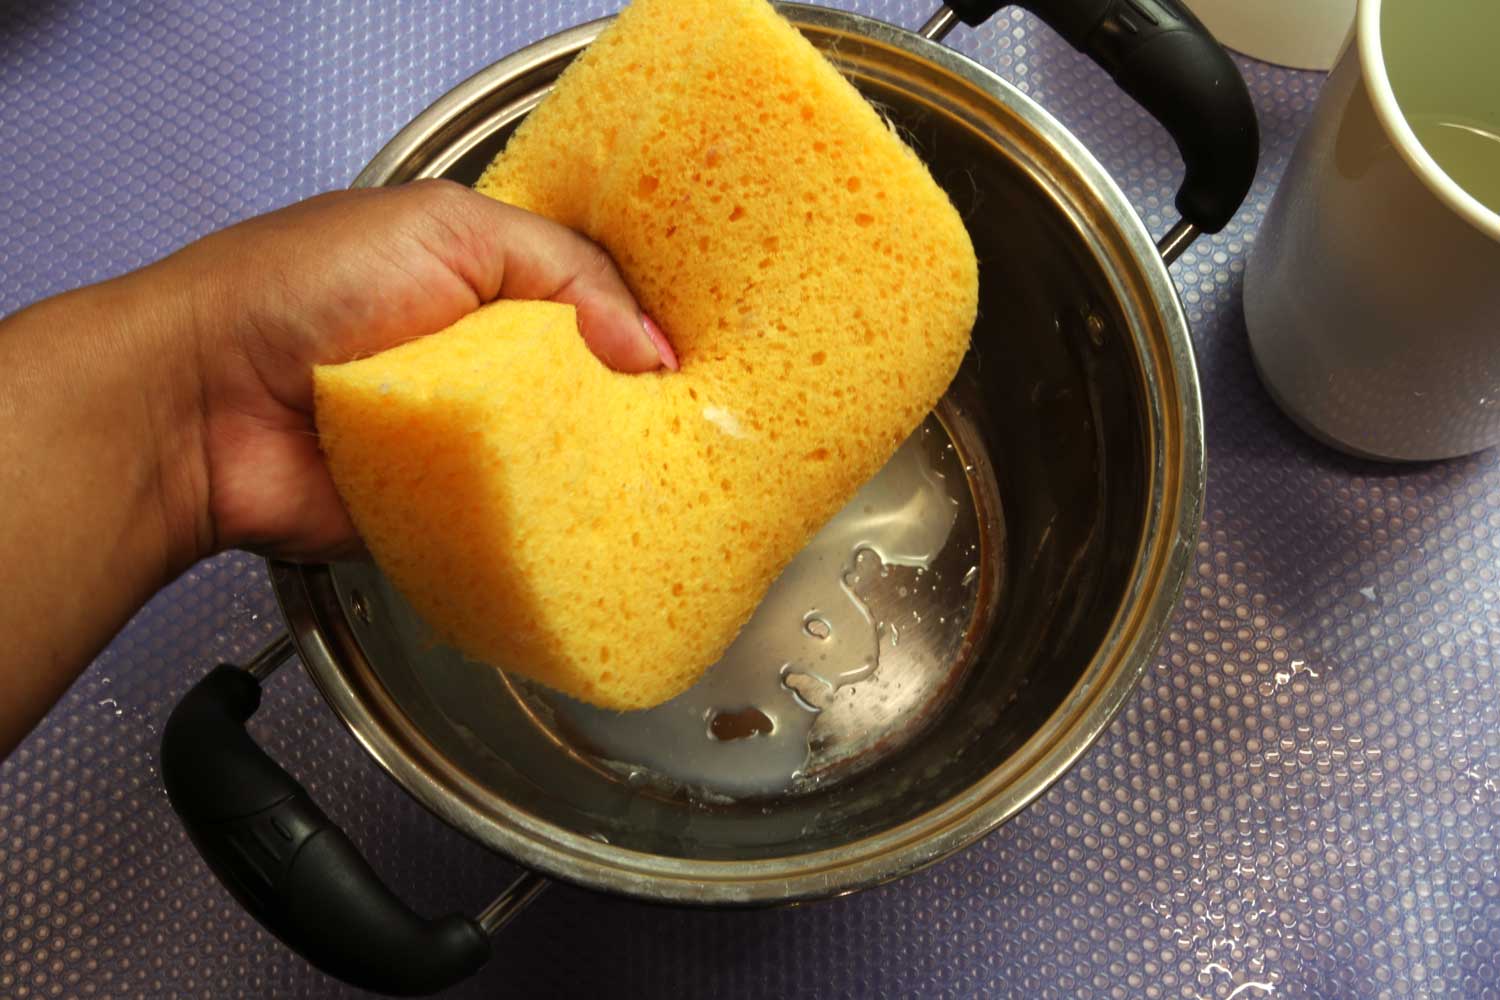 A hand squeezing a yellow sponge over a pot to empty water from the sponge.